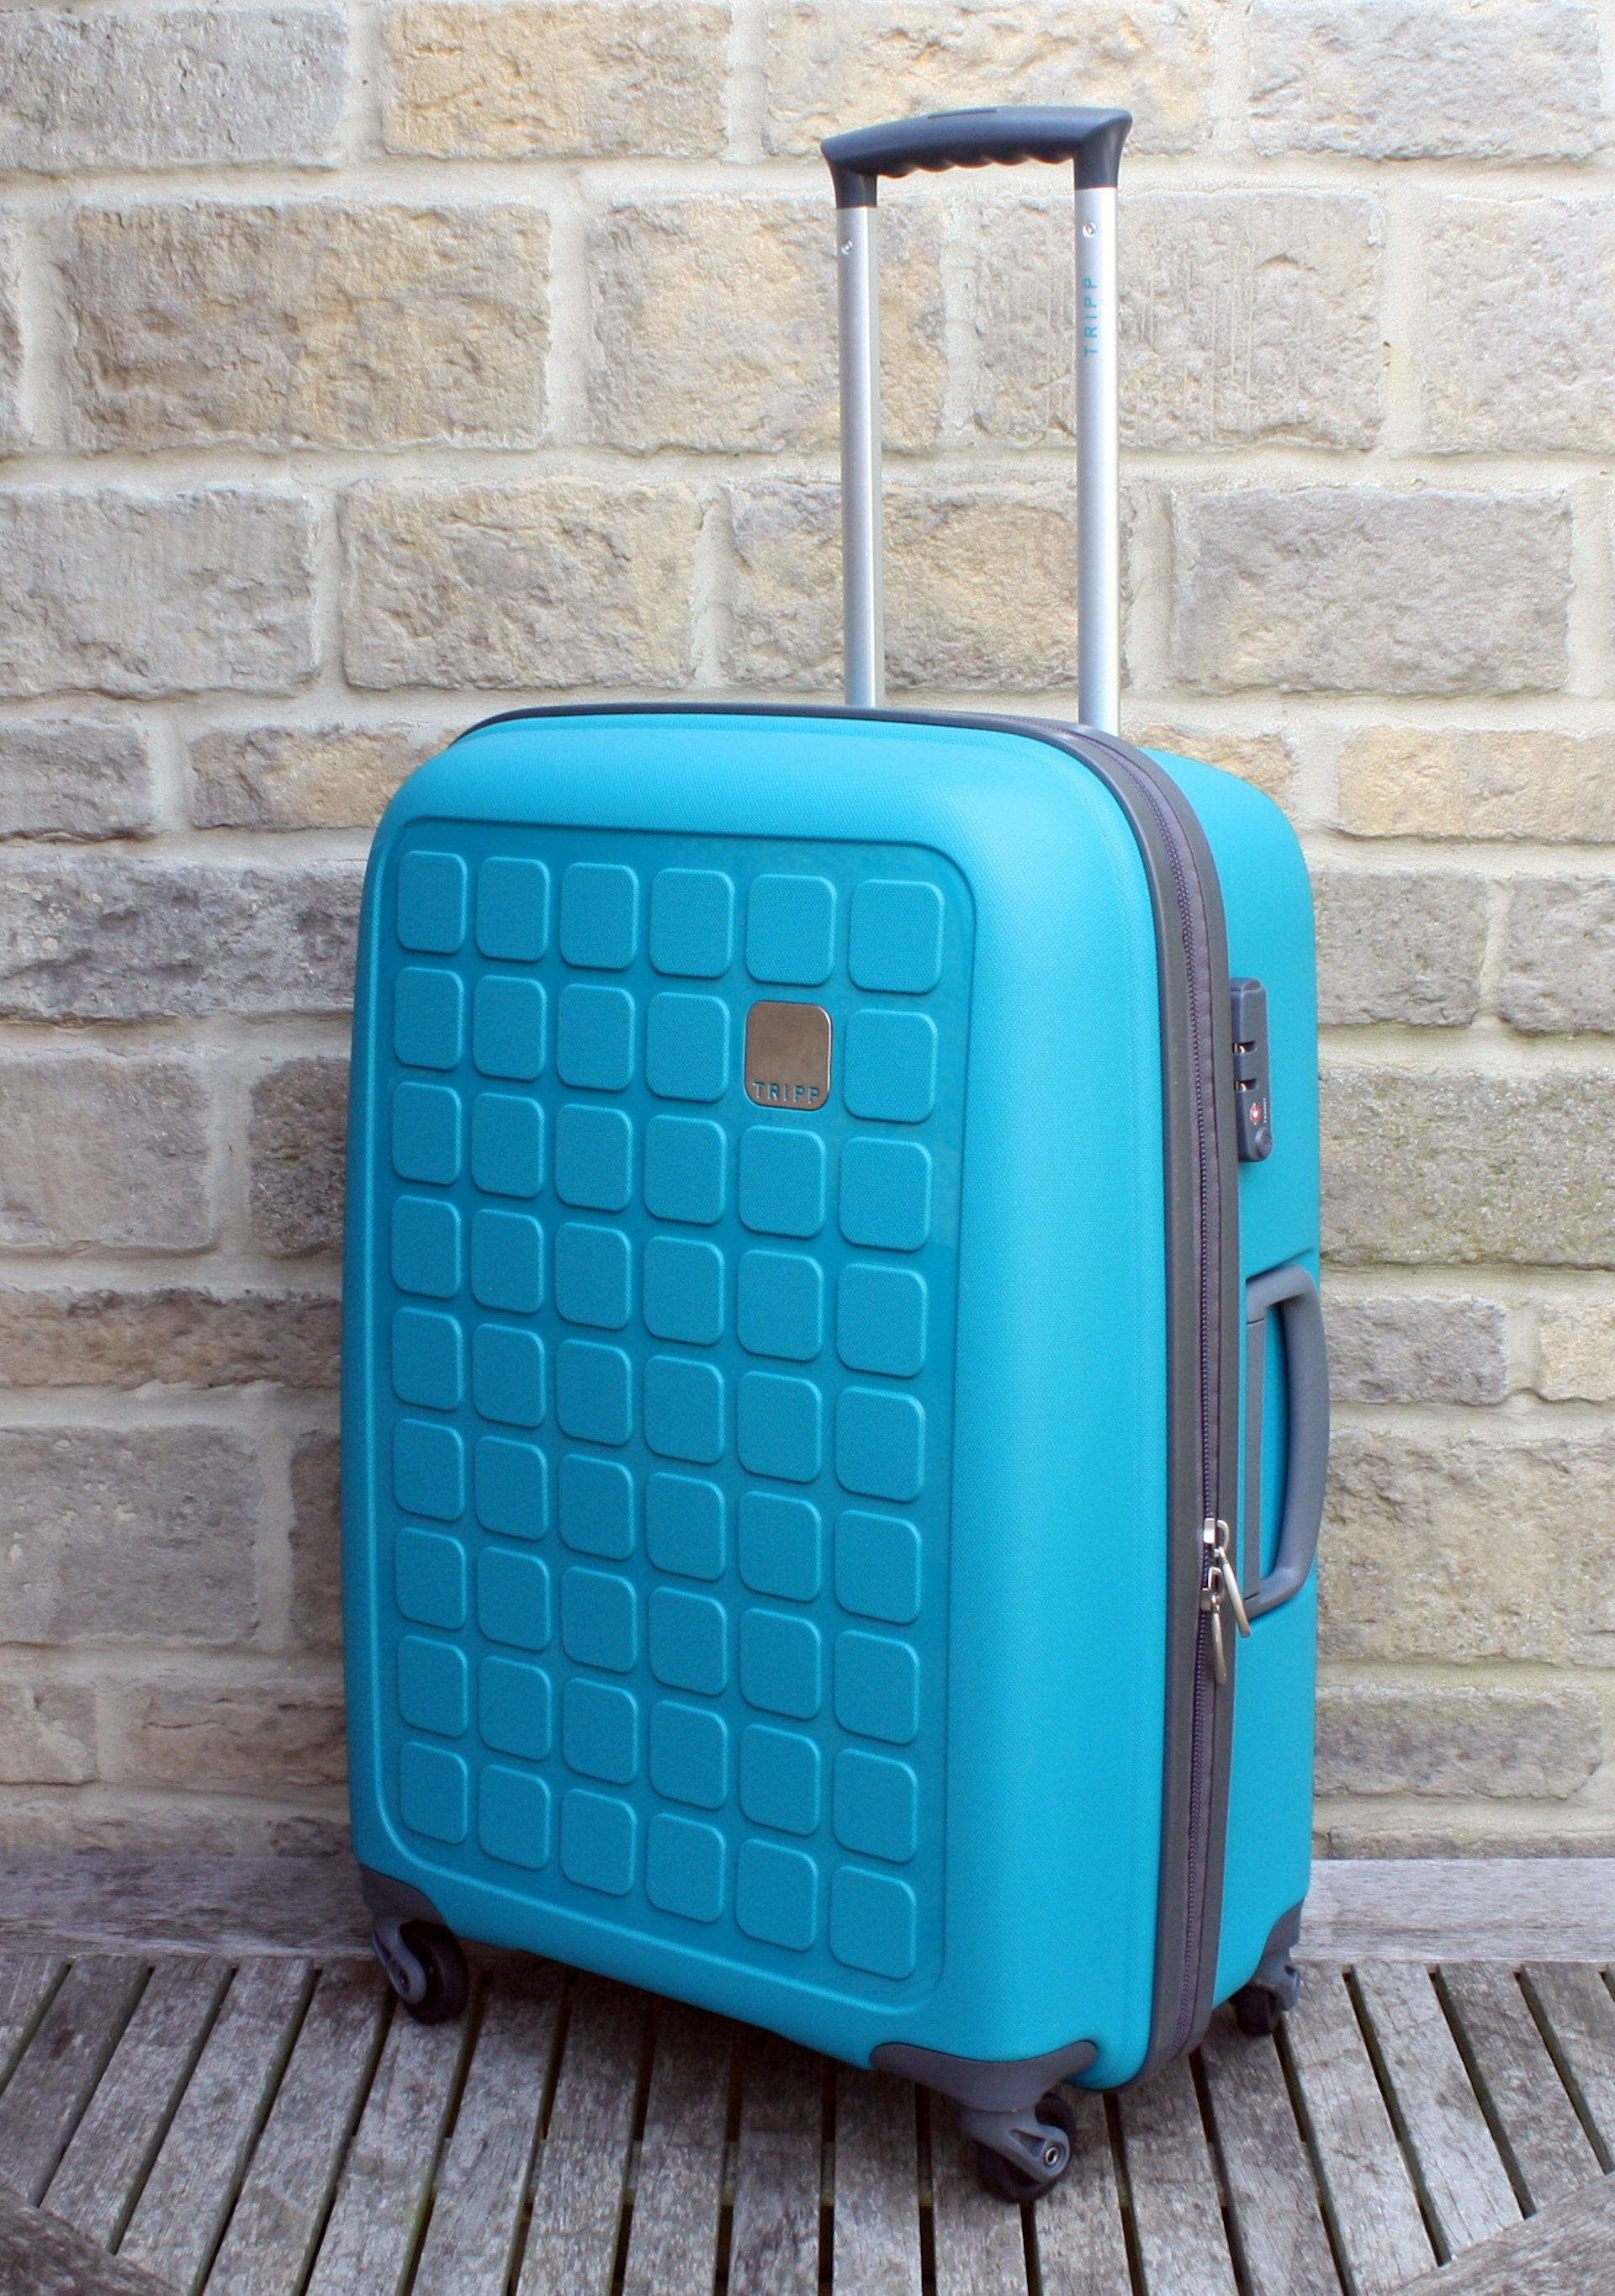 The Tripp Holiday 5 hard suitcase © David Else / Lonely Planet